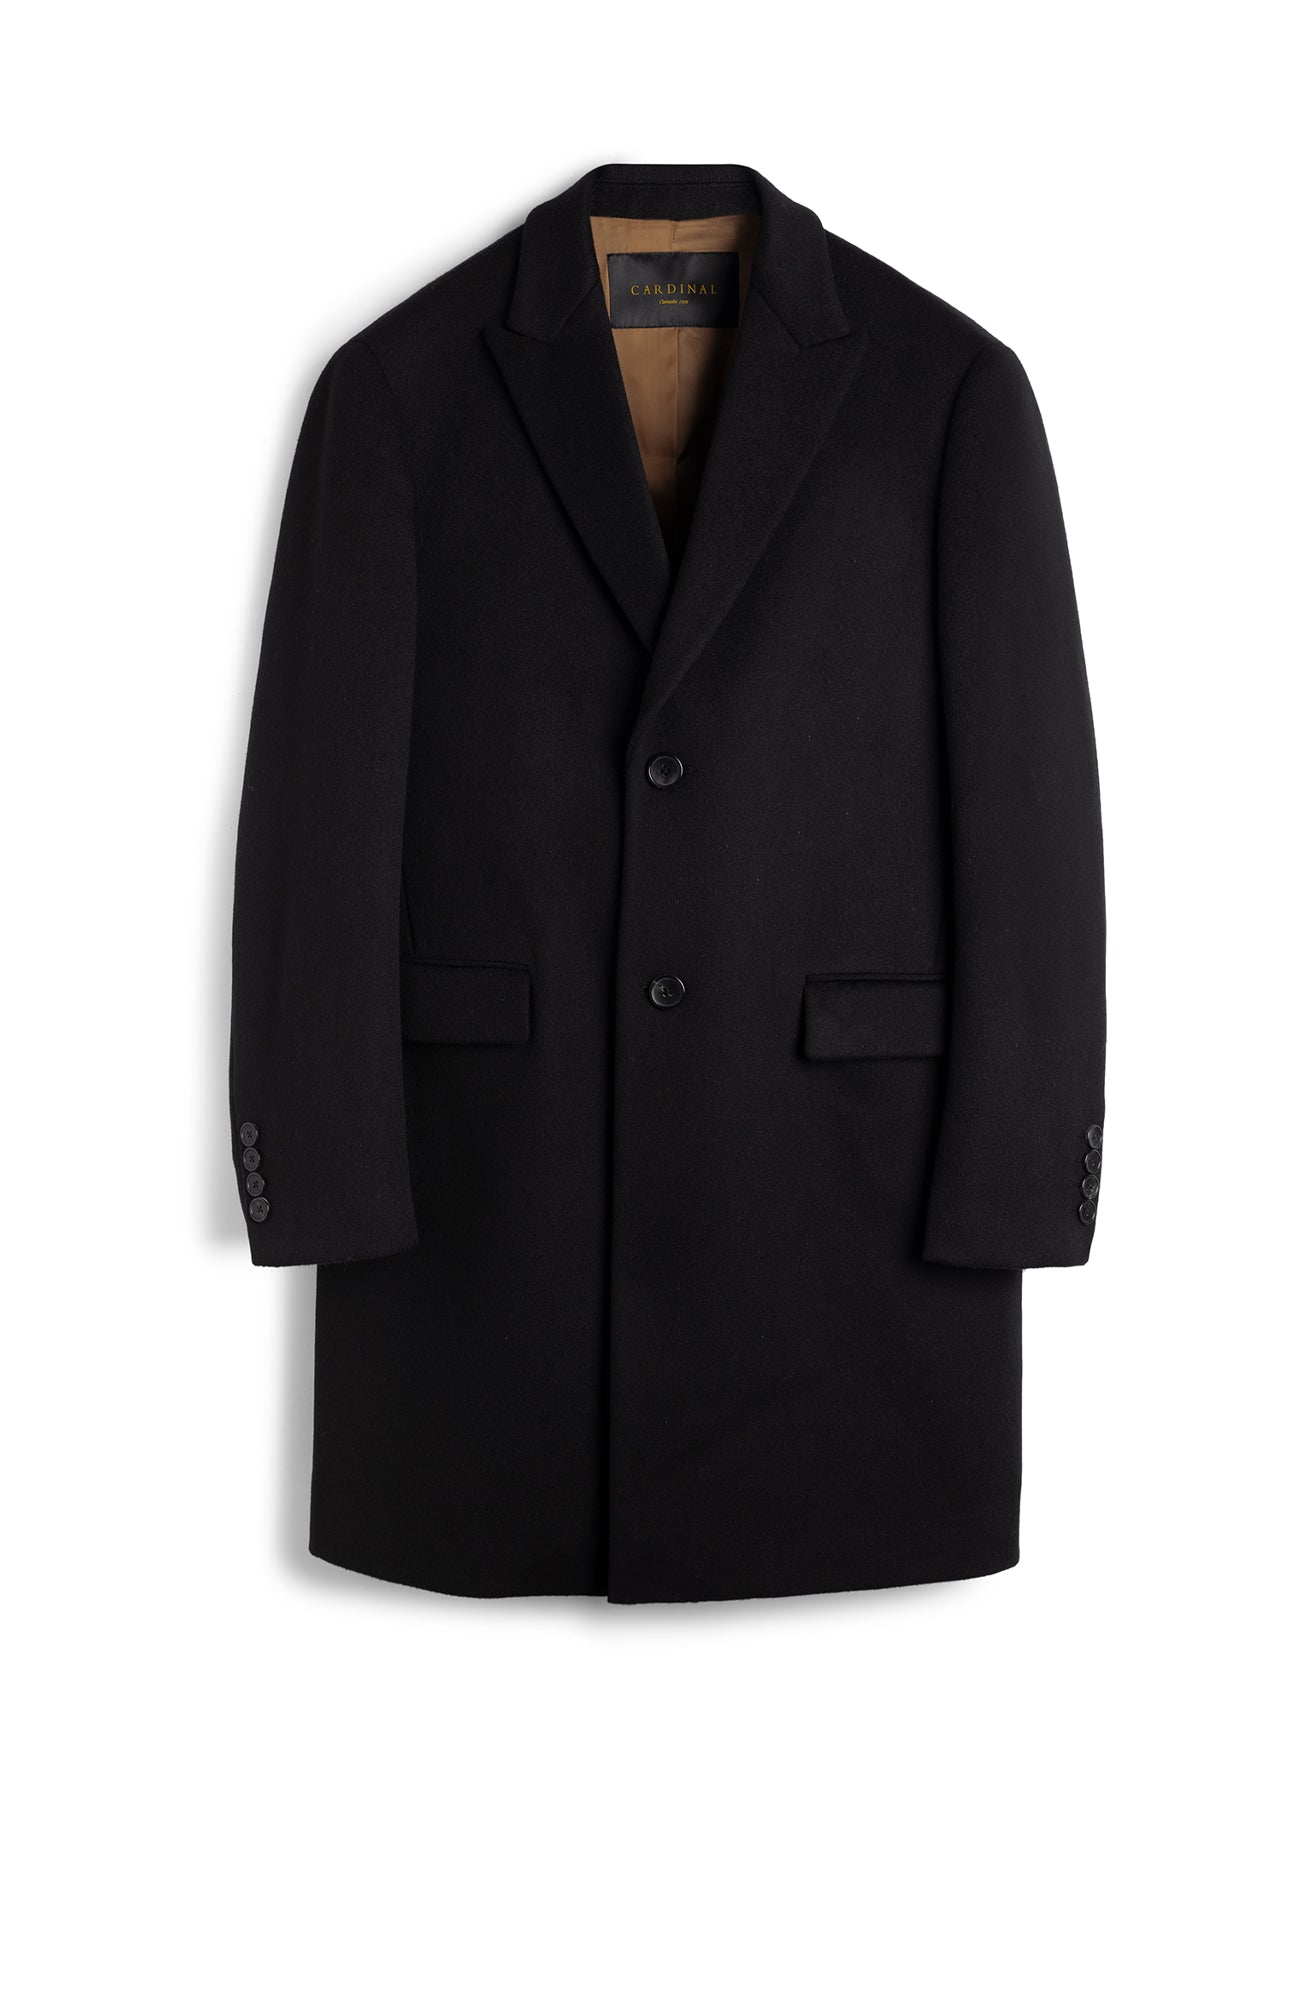 SUTTON BLACK WOOL OVERCOAT - MENS - Cardinal of Canada - US - Sutton - Black wool topcoat 38 inch length